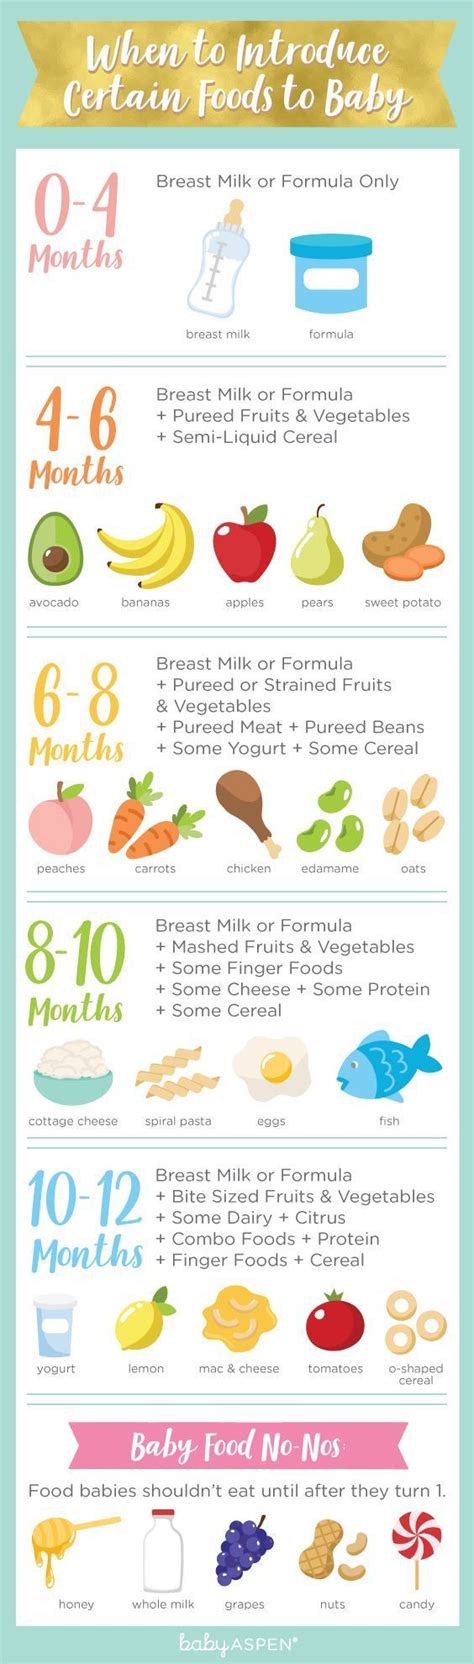 When To Introduce Certain Foods To Baby Infographic Baby Infographic Baby Food Recipes